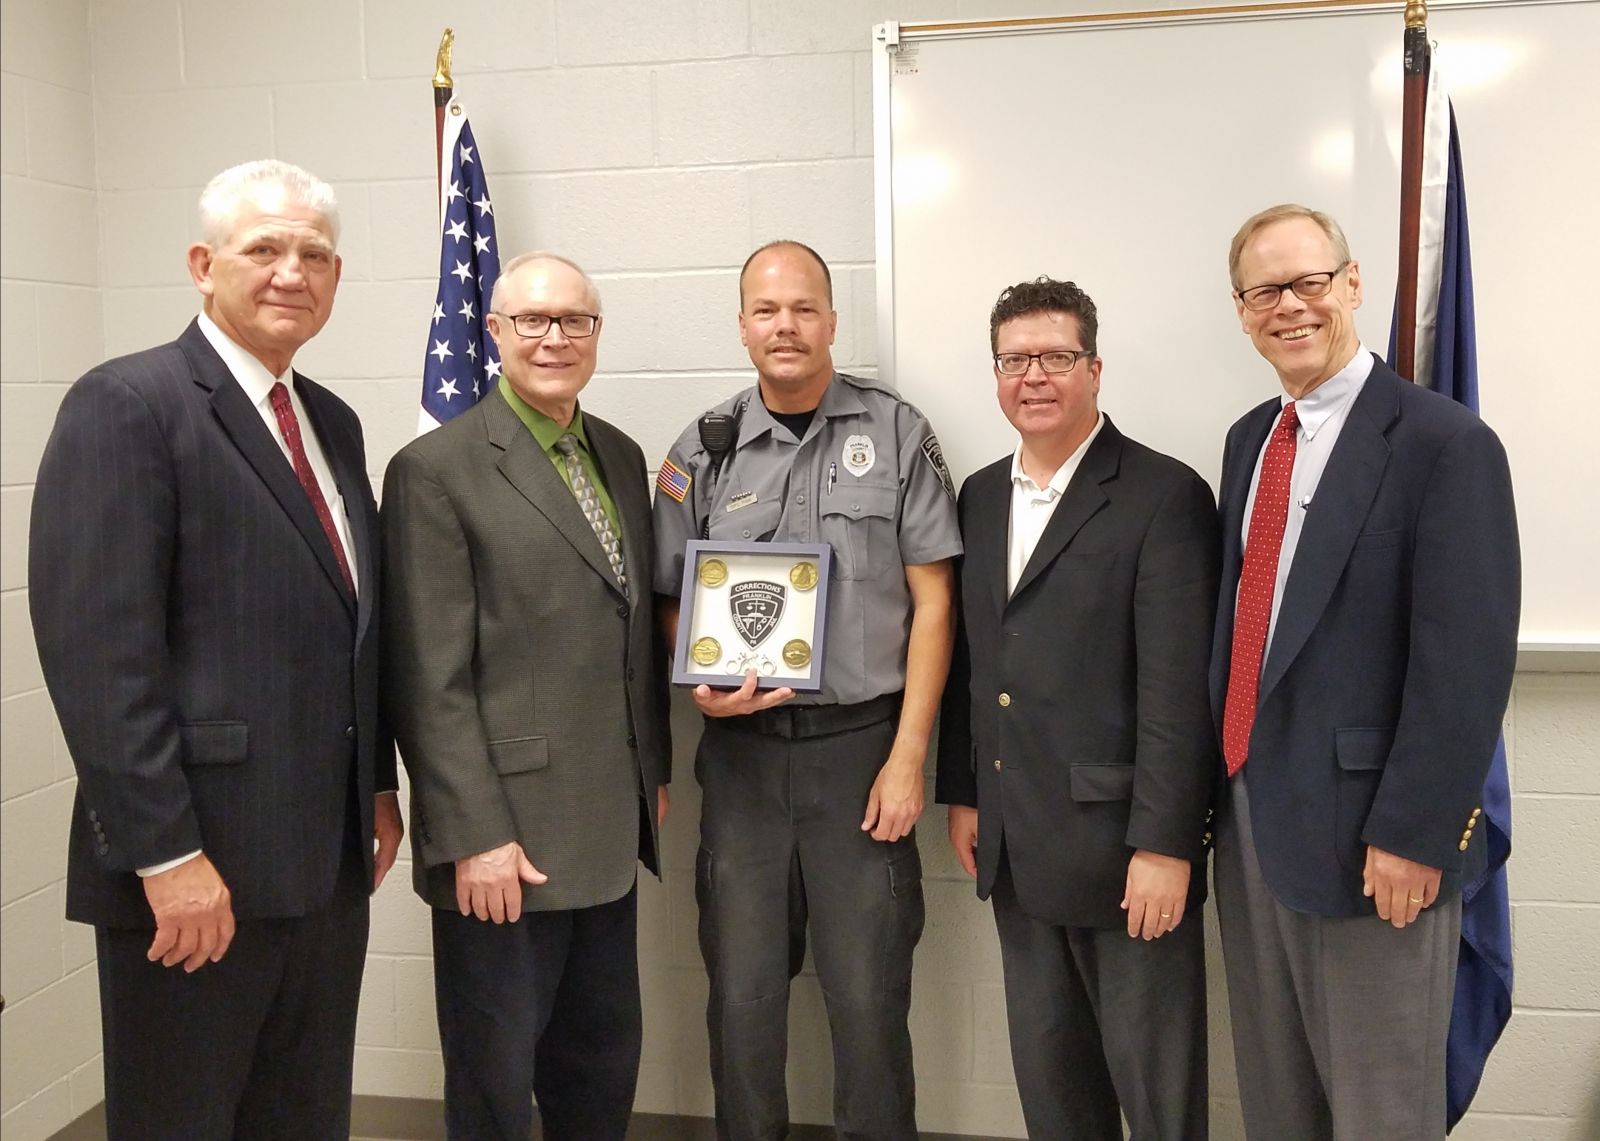 Pictured above, left to right: Former County Administrator John Hart, Commissioner Bob Thomas, Correctional Officer of the Year Robert Fink, Commissioner Chairman Dave Keller, Commissioner Bob Ziobrowski